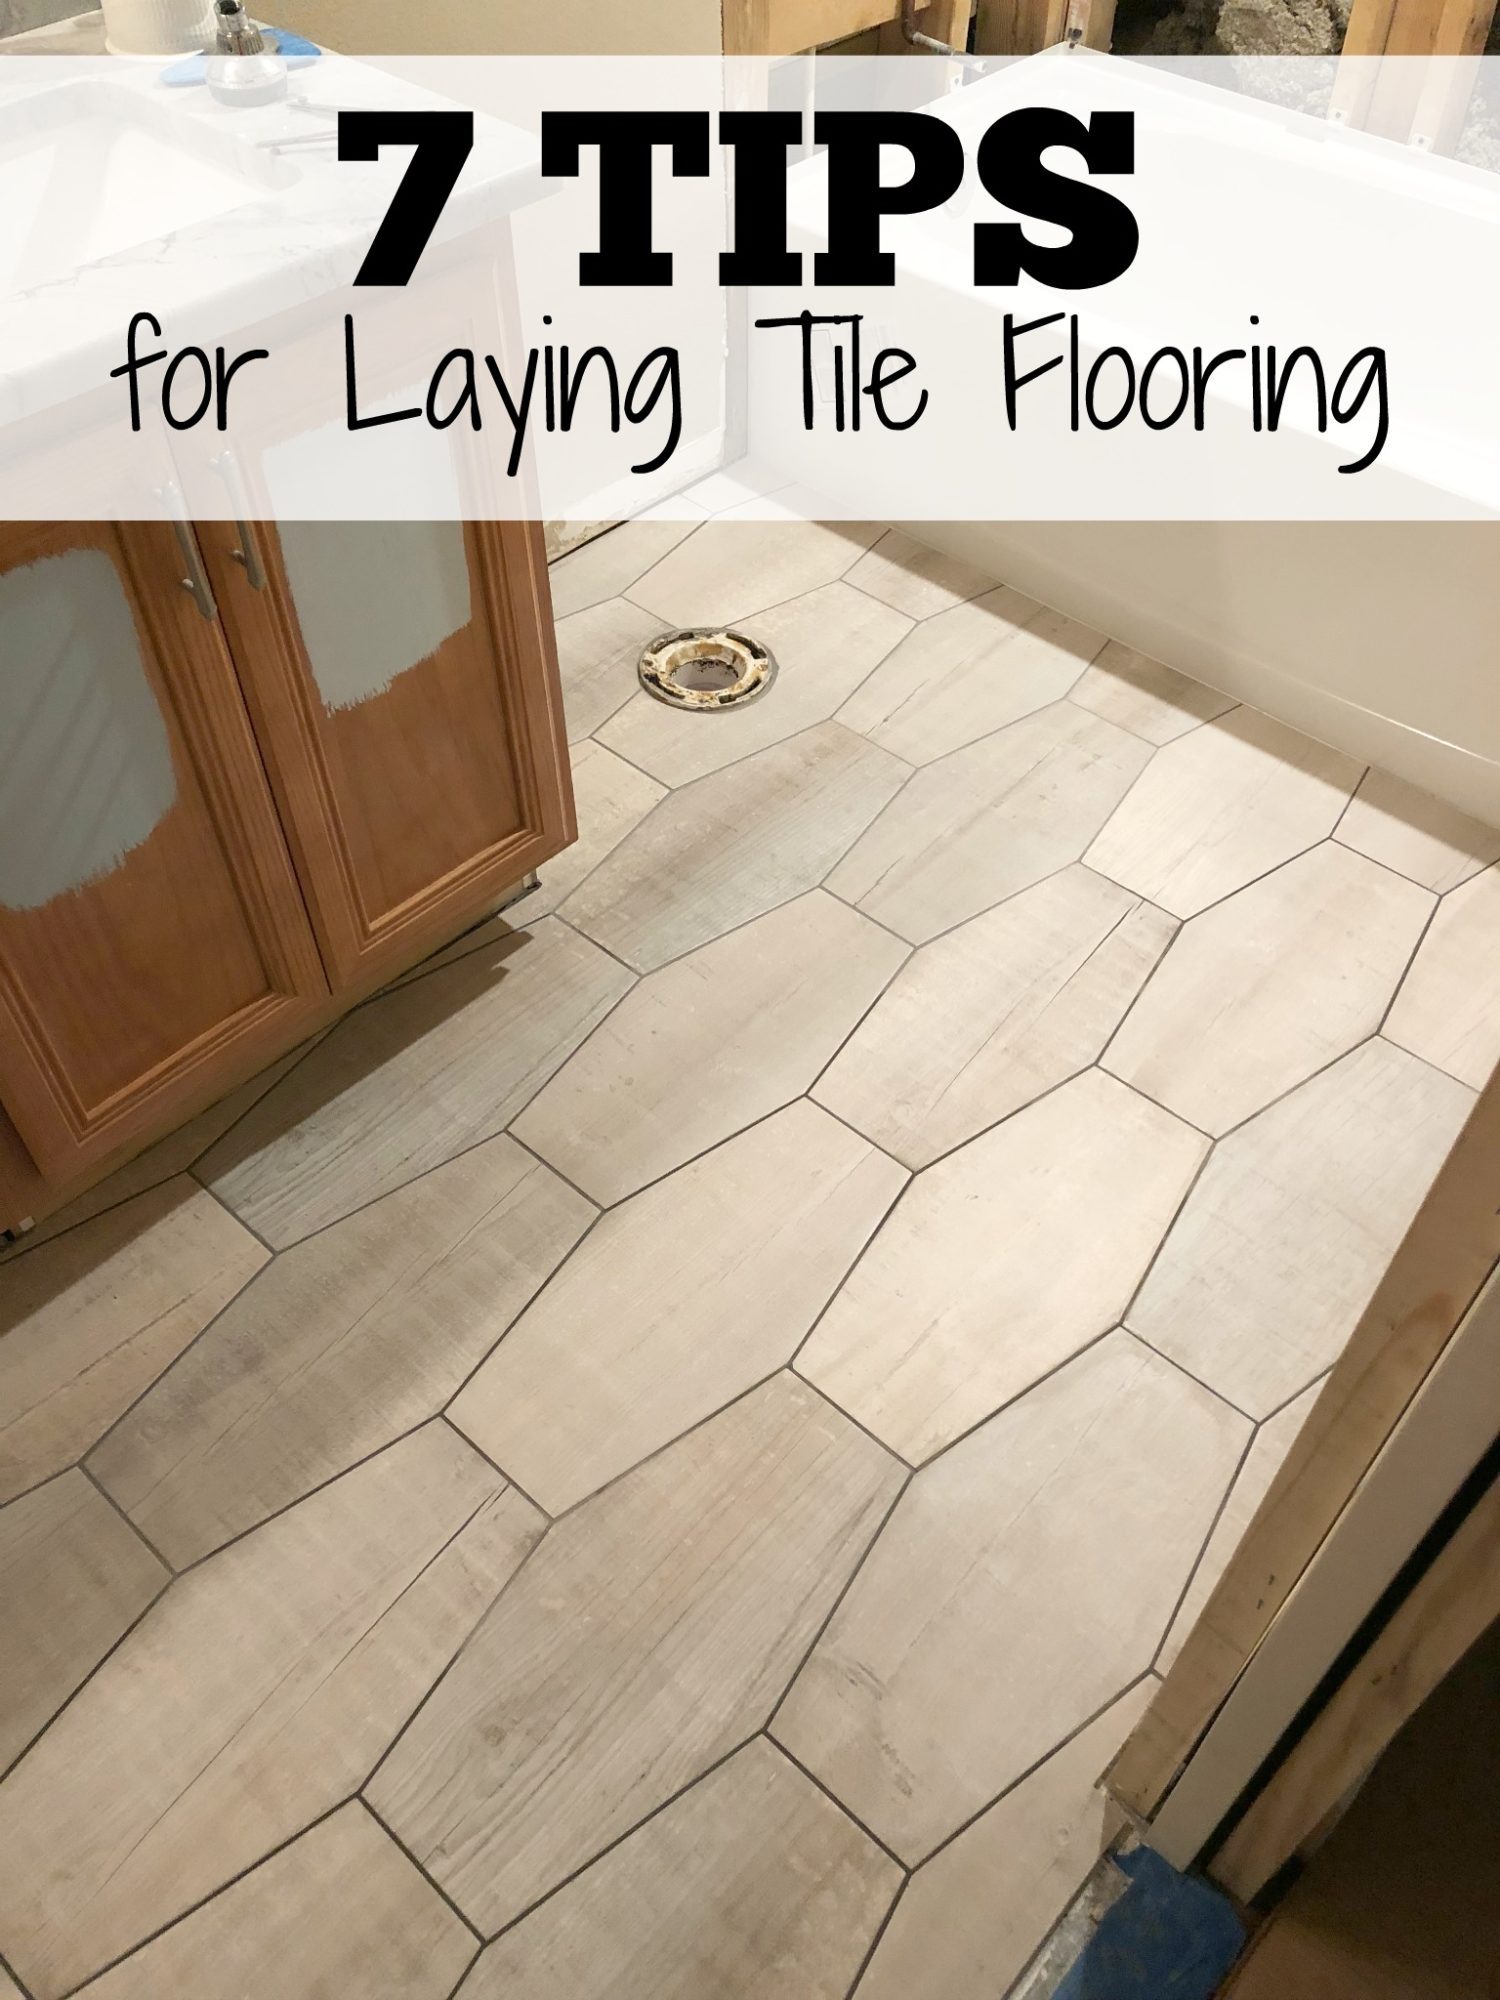 7 Tips for Laying Tile Flooring